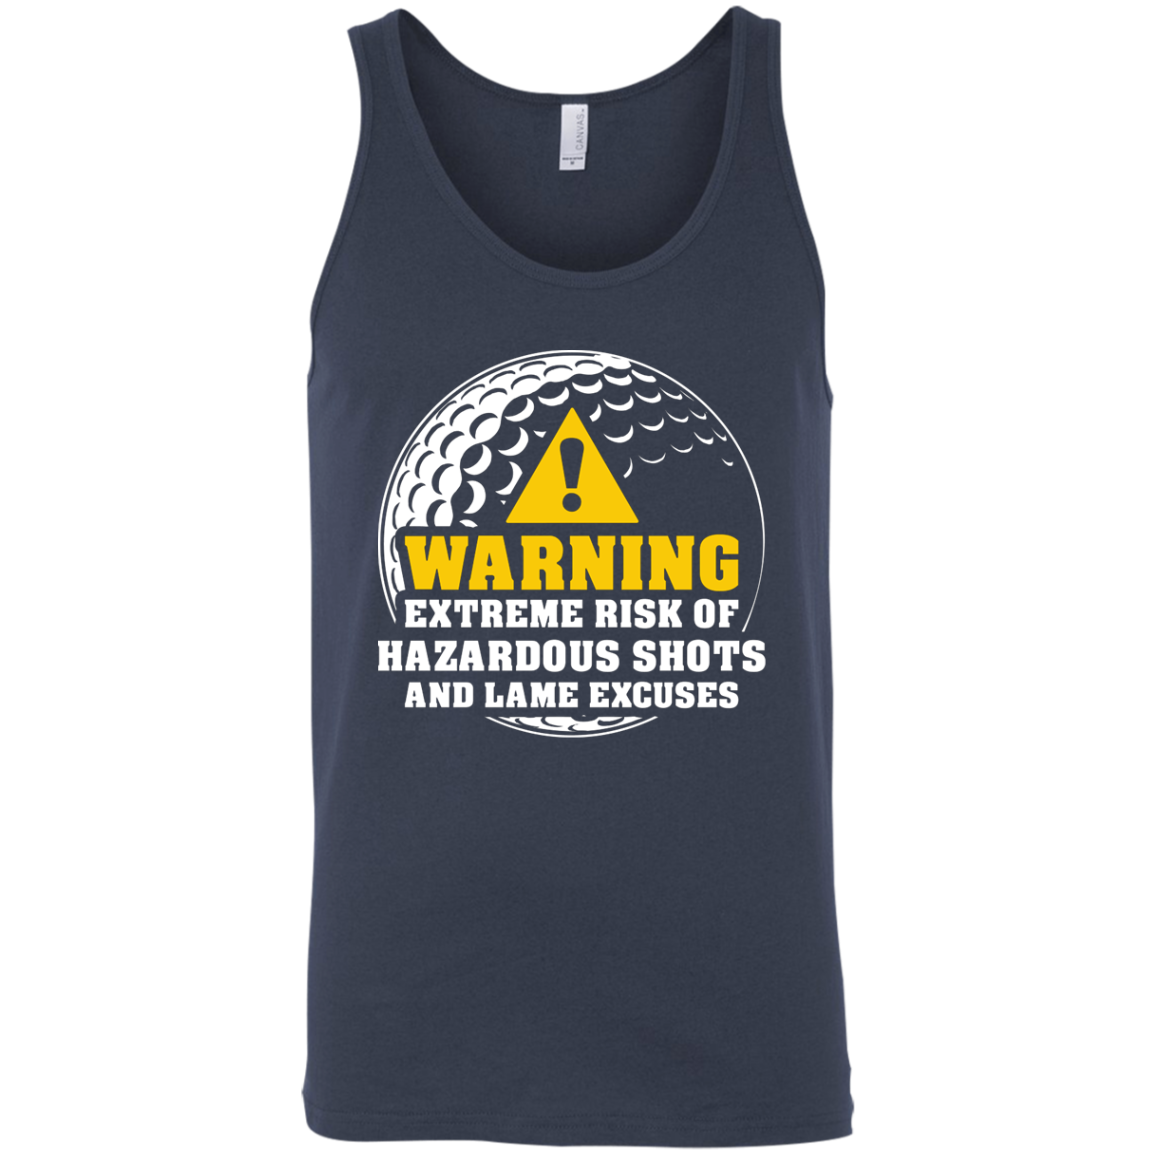 Warning Extreme Risk Of Hazardous Shots And Lame Excuses Tank Top Apparel - The Beer Lodge